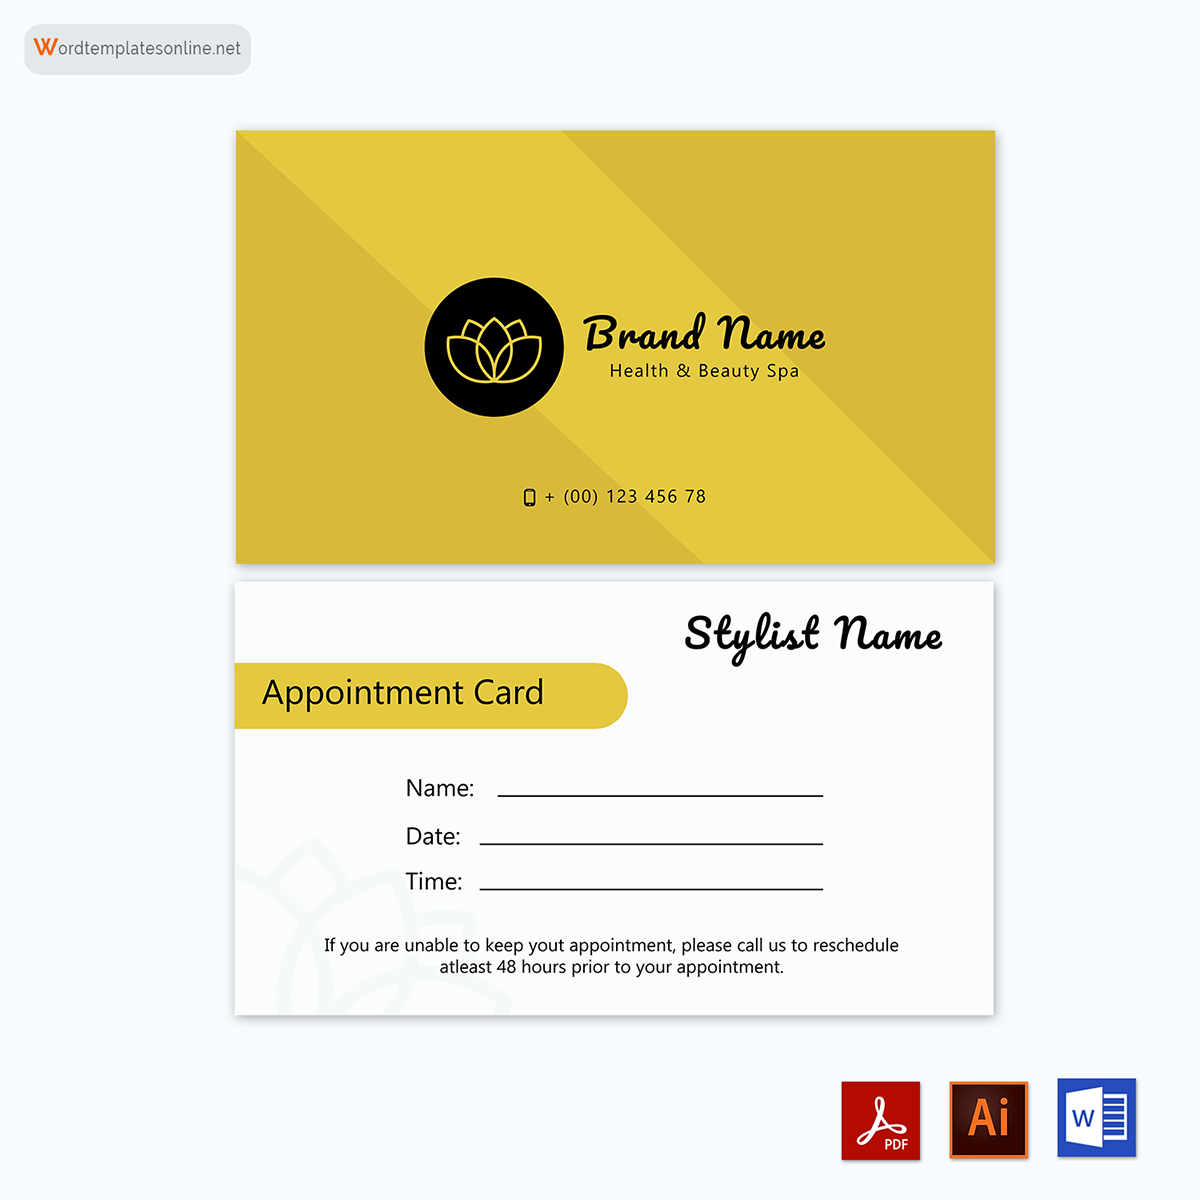 Appointment Card Template - Free Sample